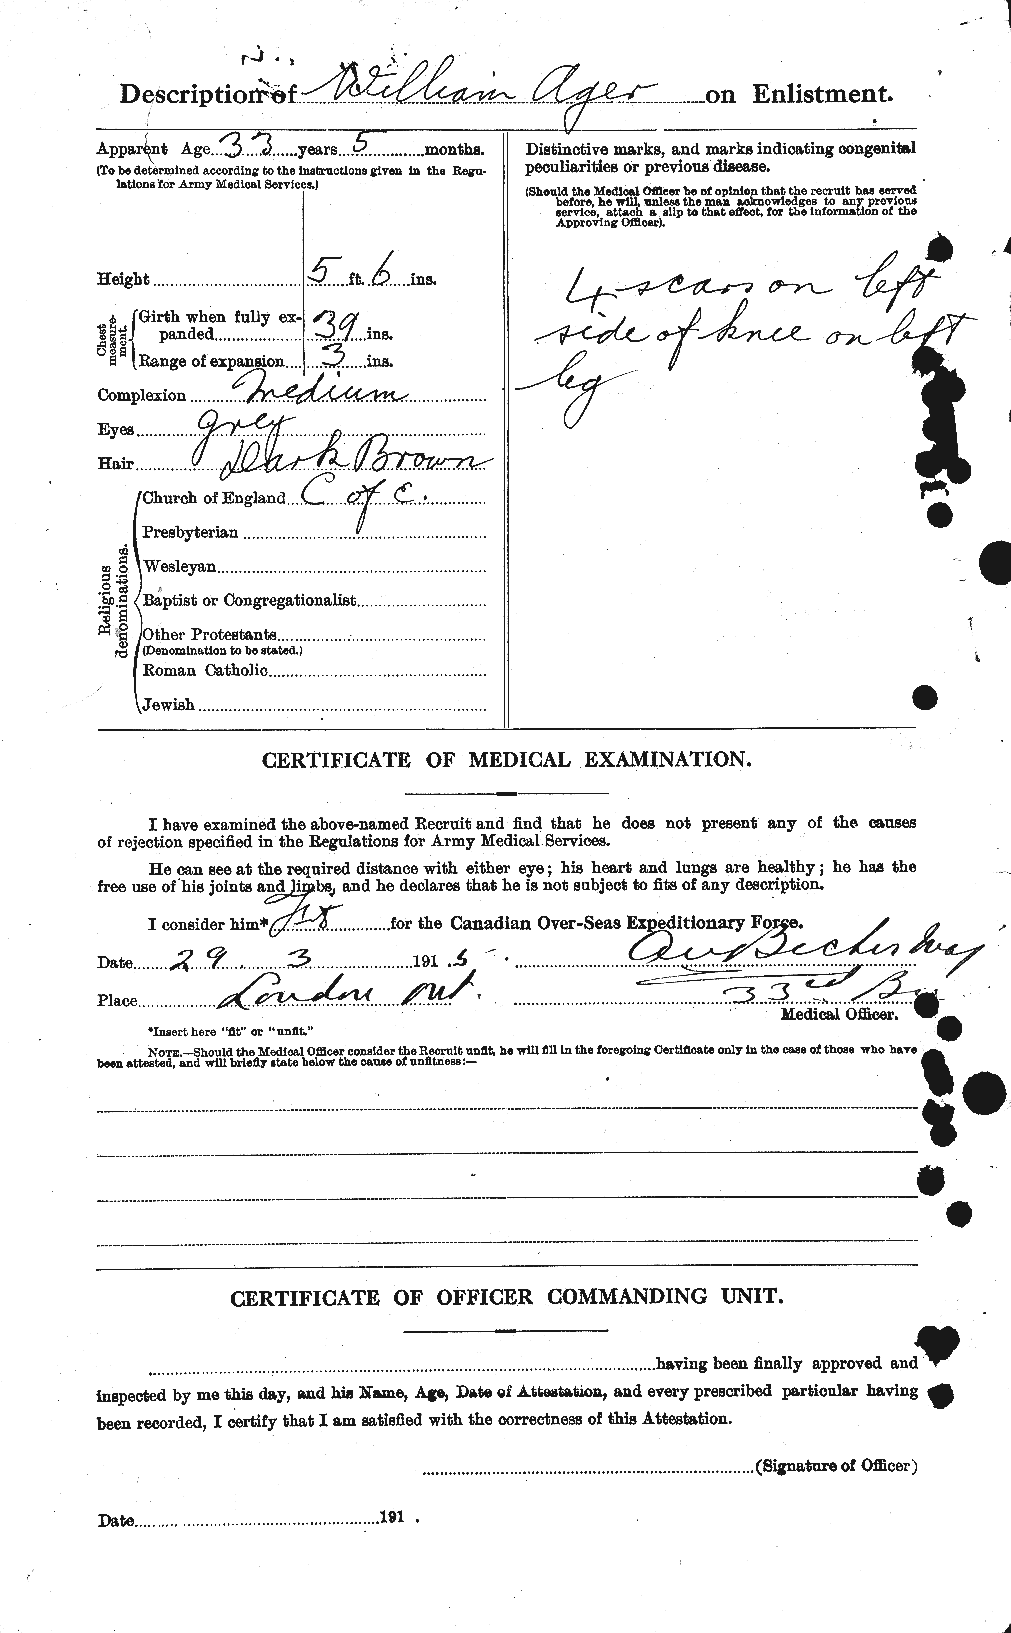 Personnel Records of the First World War - CEF 203712b